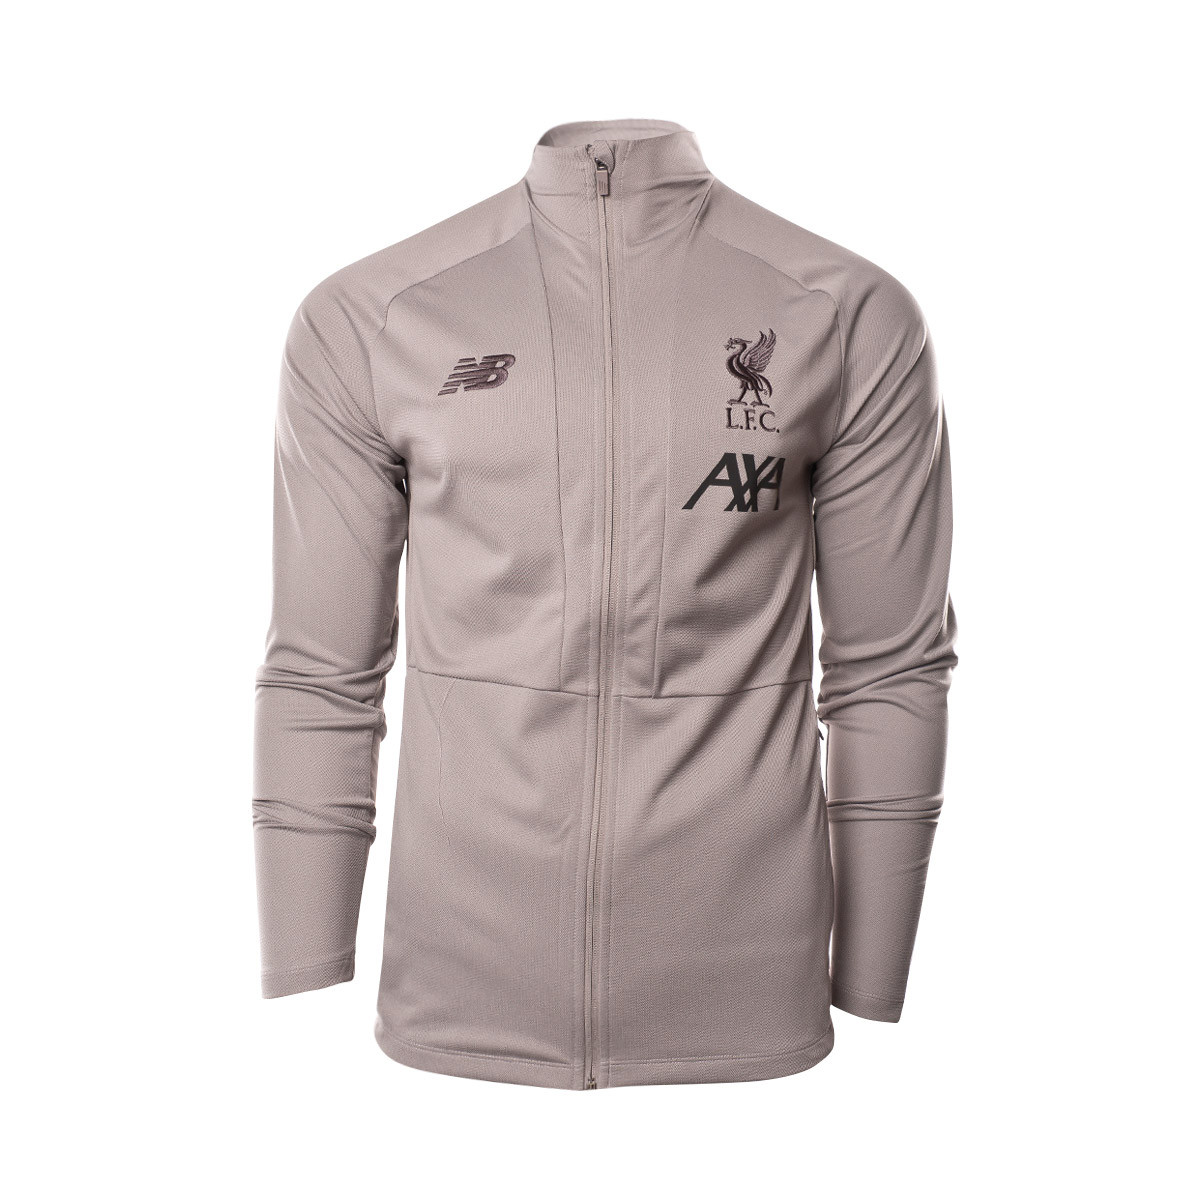 liverpool jacket total sports